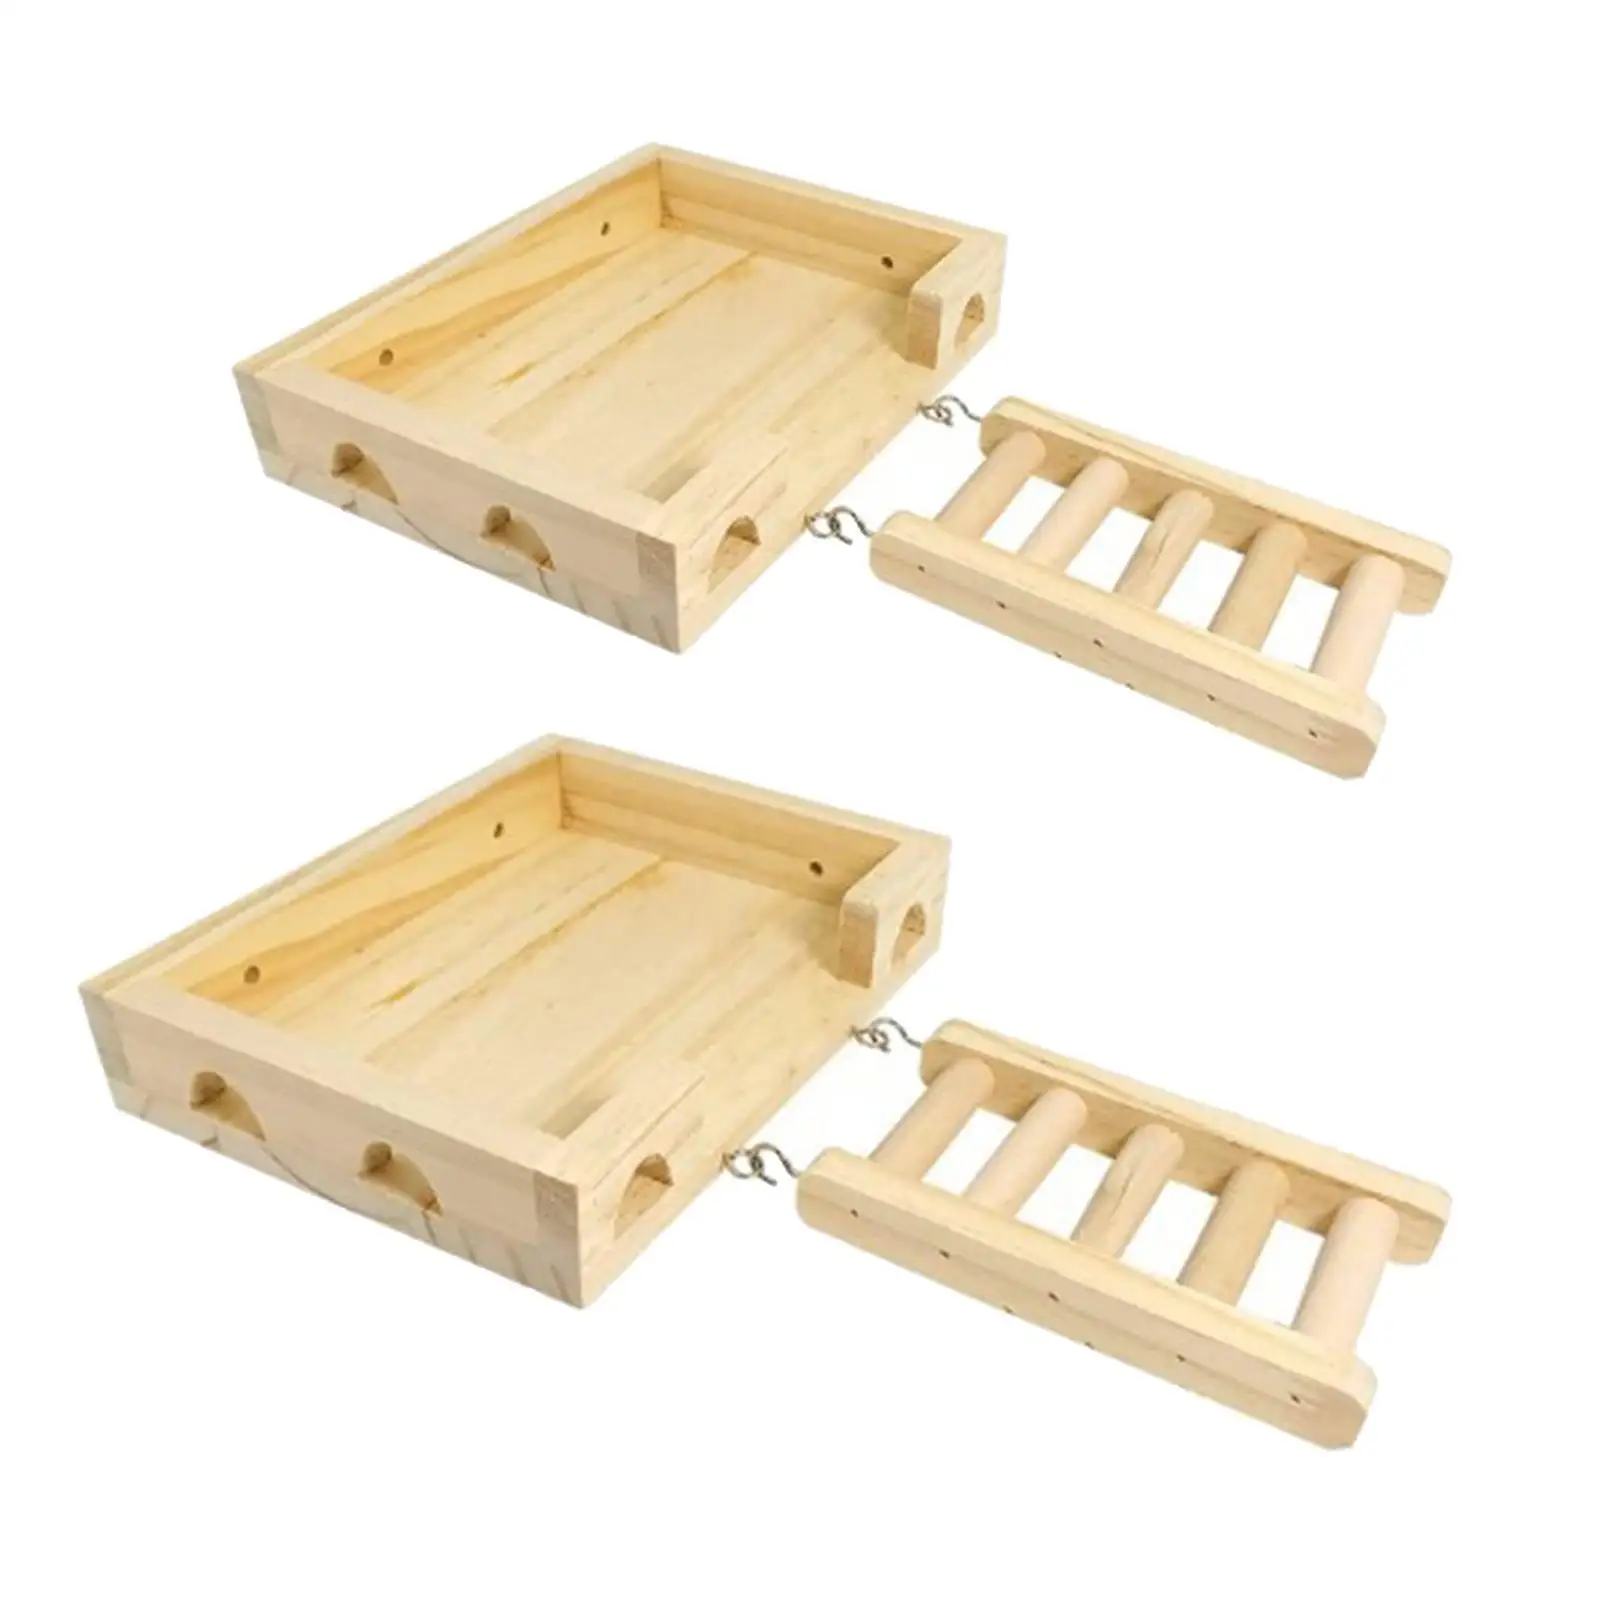 Hamster Wooden Ladder Toy Bird Cage Accessories Pet Bird Parrot Playground Chewing Exercise Toy Hamster Stand Platform Toys